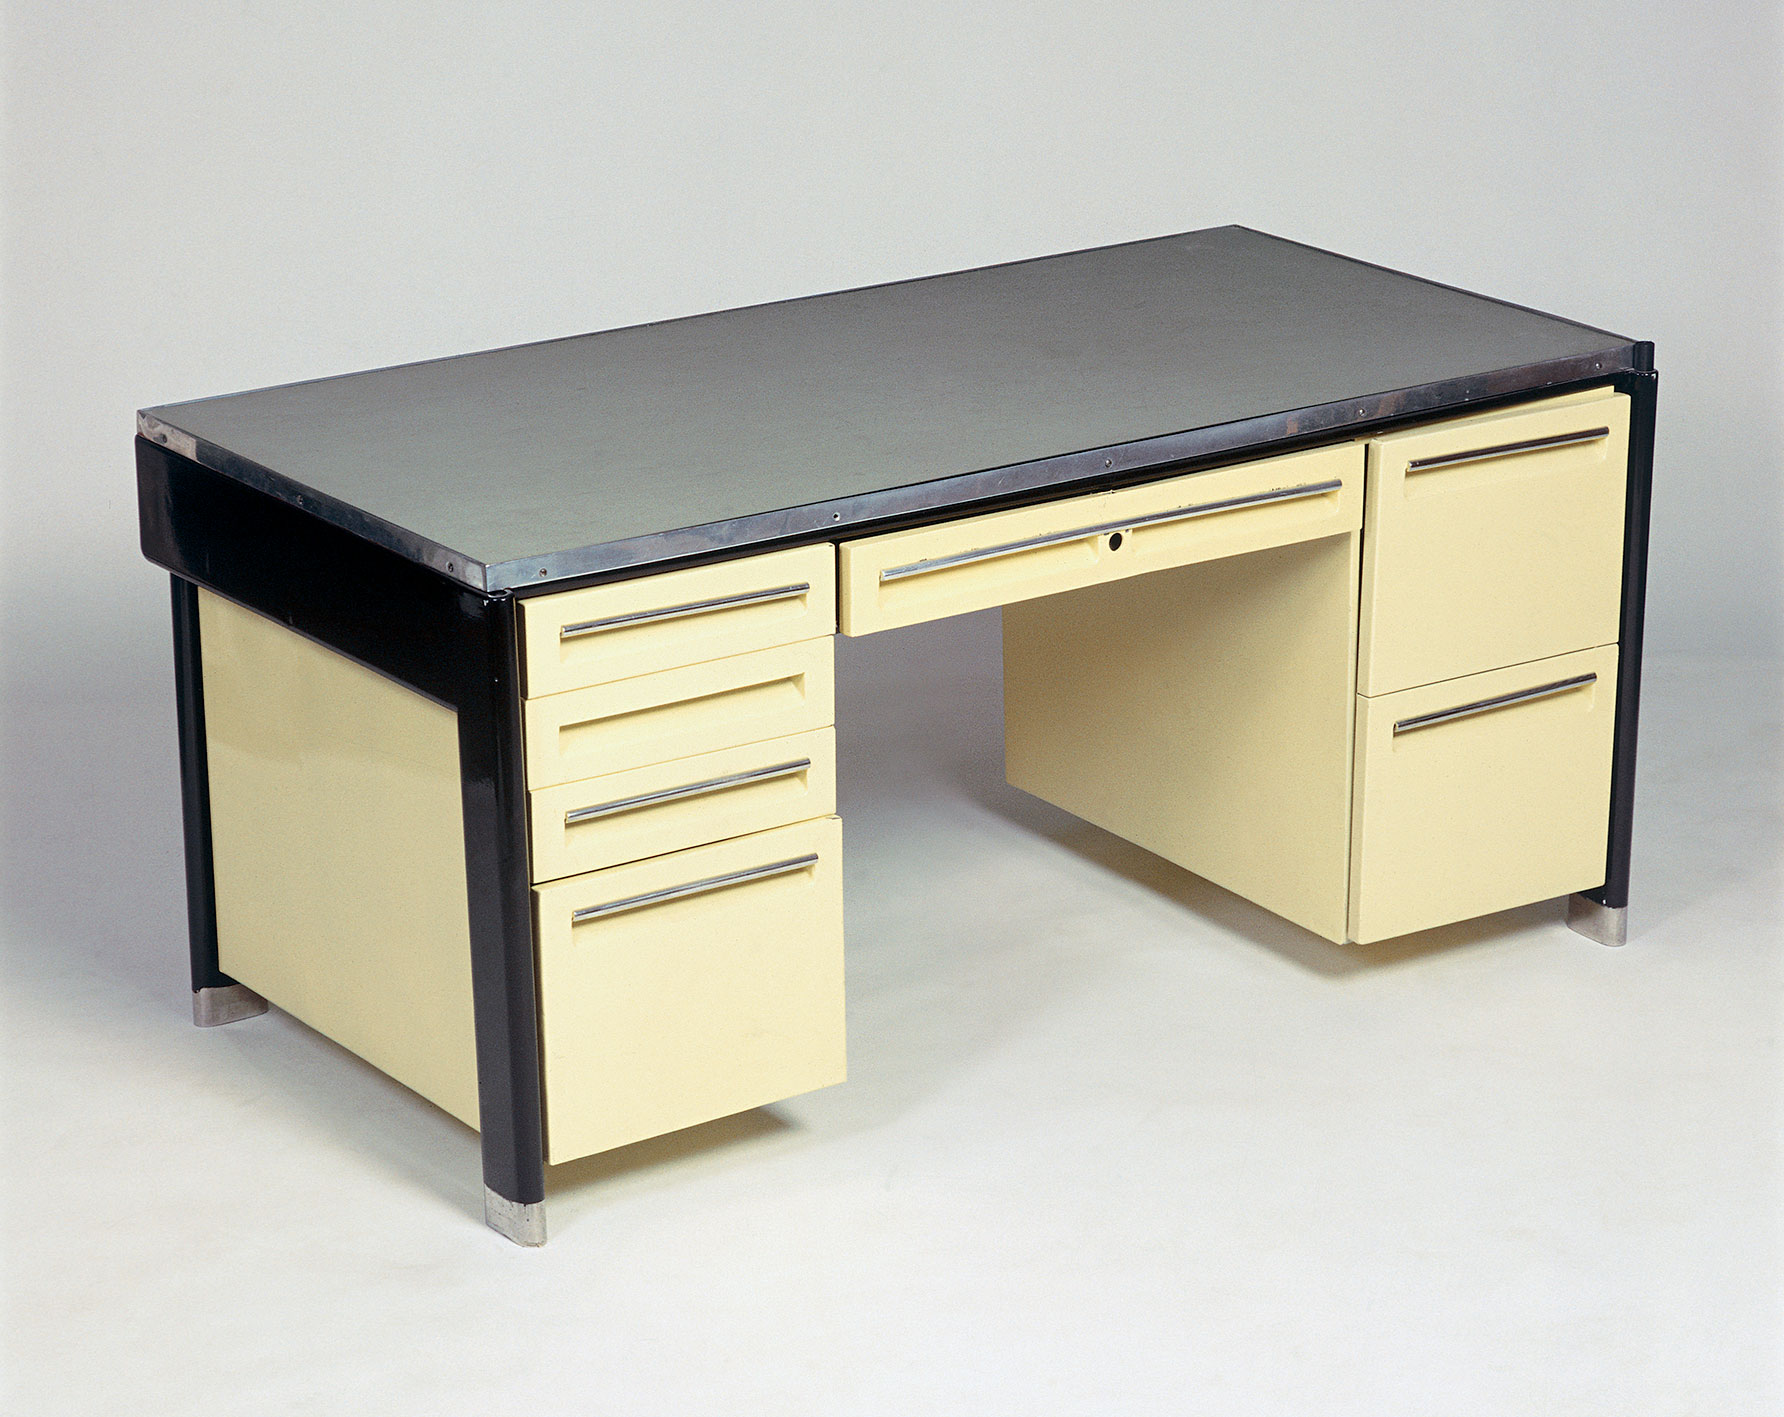 Desk type CPDE with variable fittings, variant with combined furnishing no. 4, 1934.